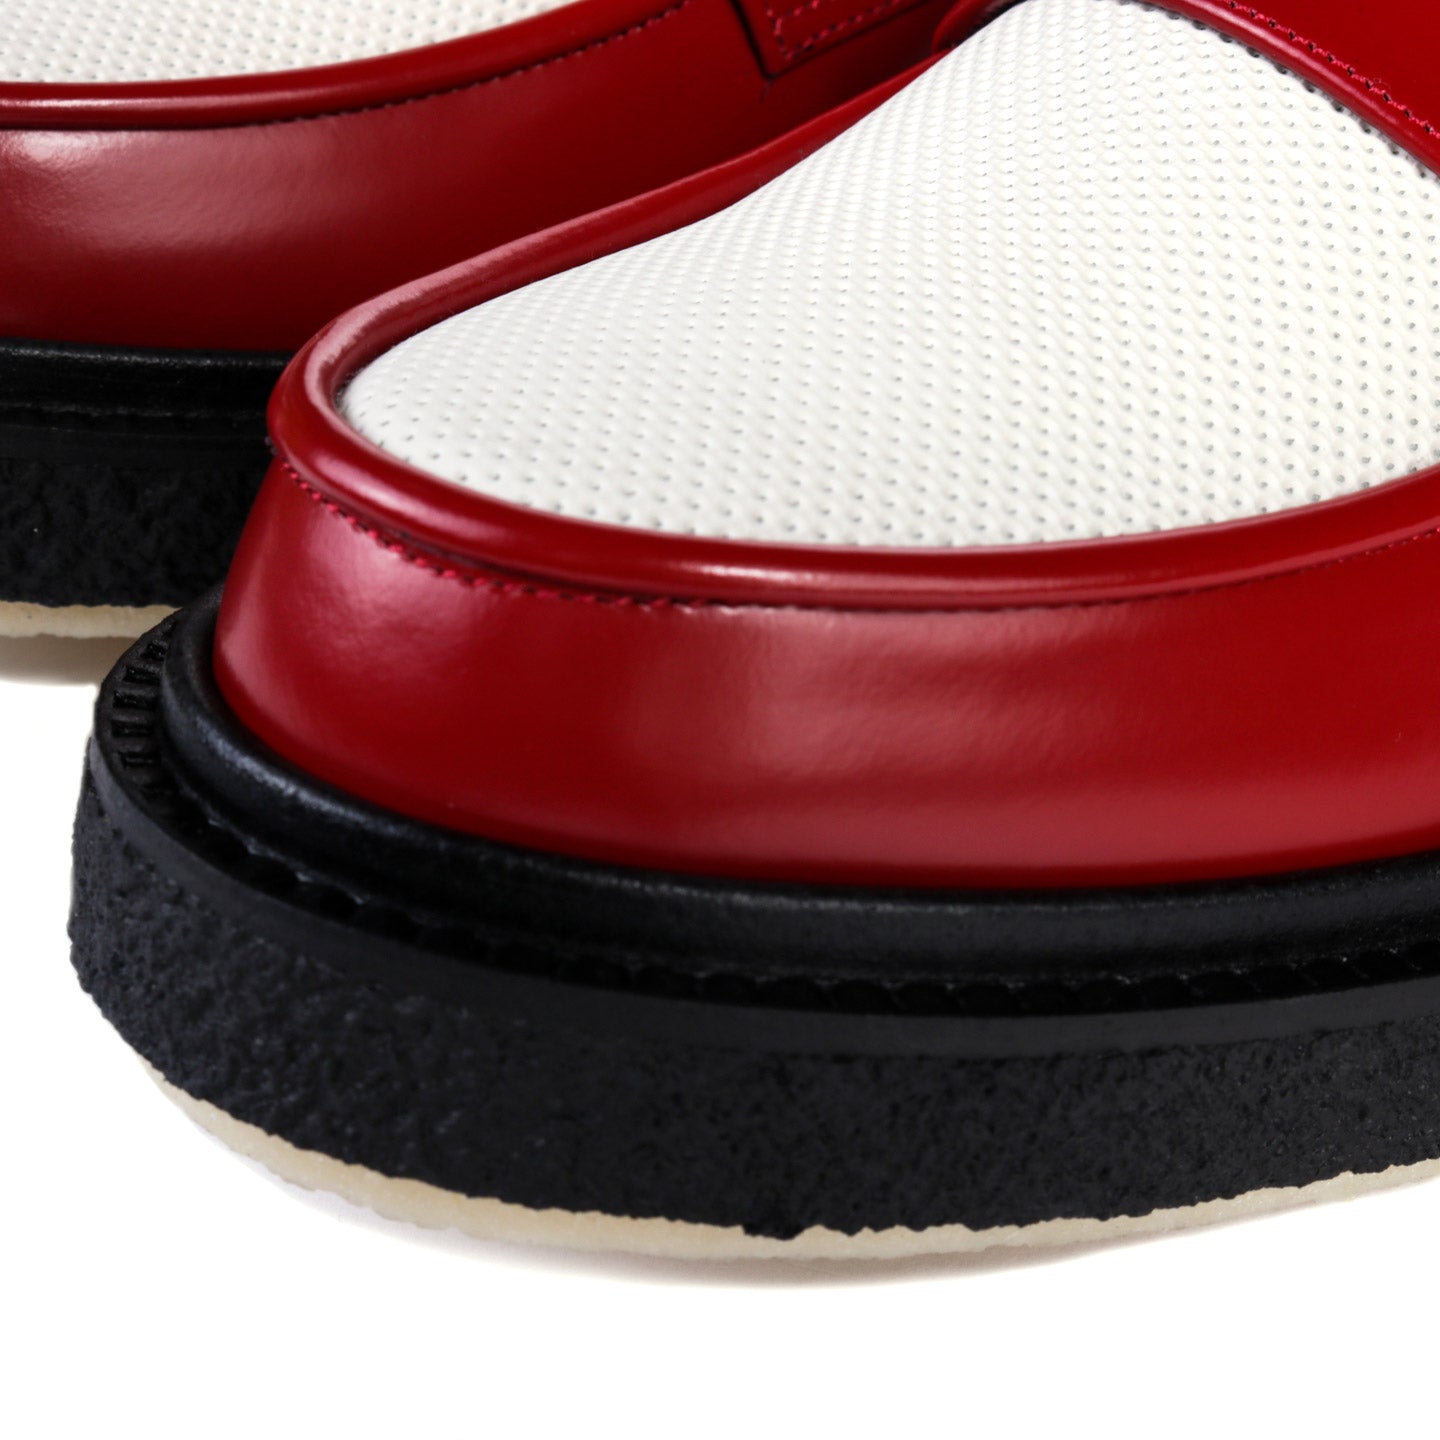 ADIEU TYPE 5 LOAFER POLIDO DEEP RED / DOTS EMBOSSED WHITE